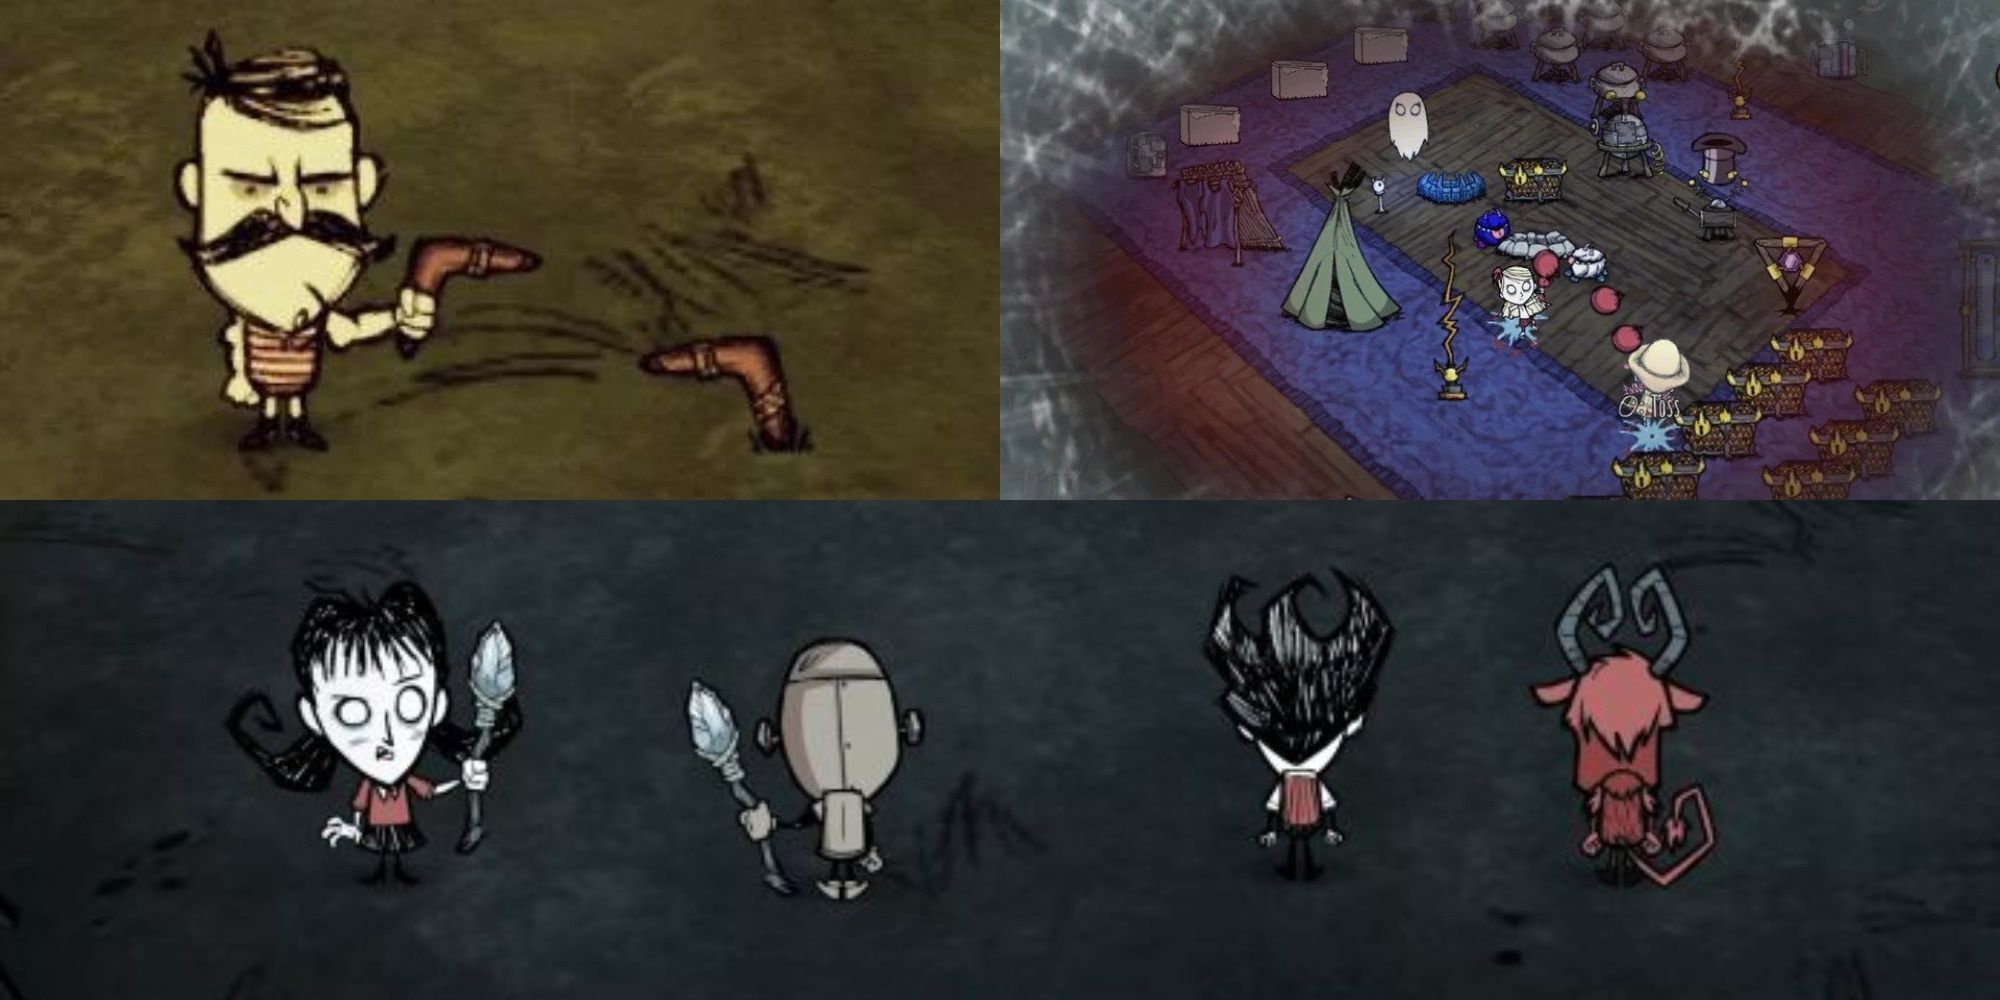 Don't Starve Together split image characters holding ranged weapons - Ice Staff, Boomerang, & Water Balloon.